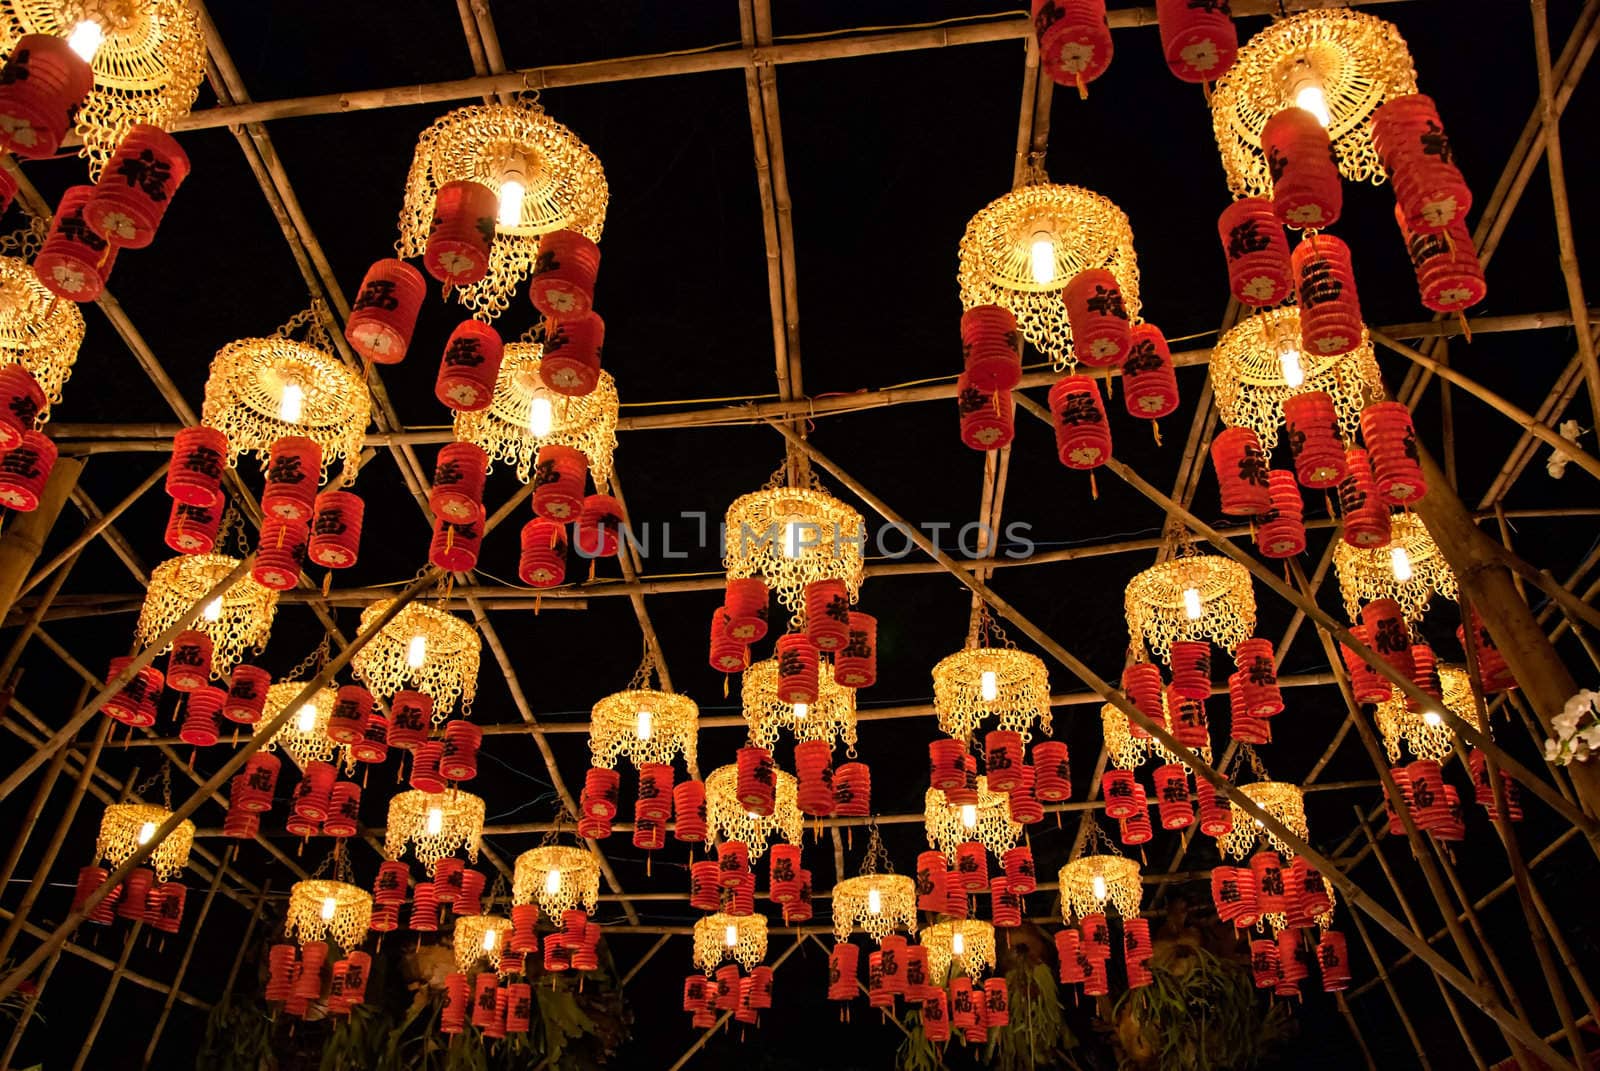 Asian traditional laterns at New Year festival nights in Vietnam. The chinese letter on the lanterns mean Happiness.